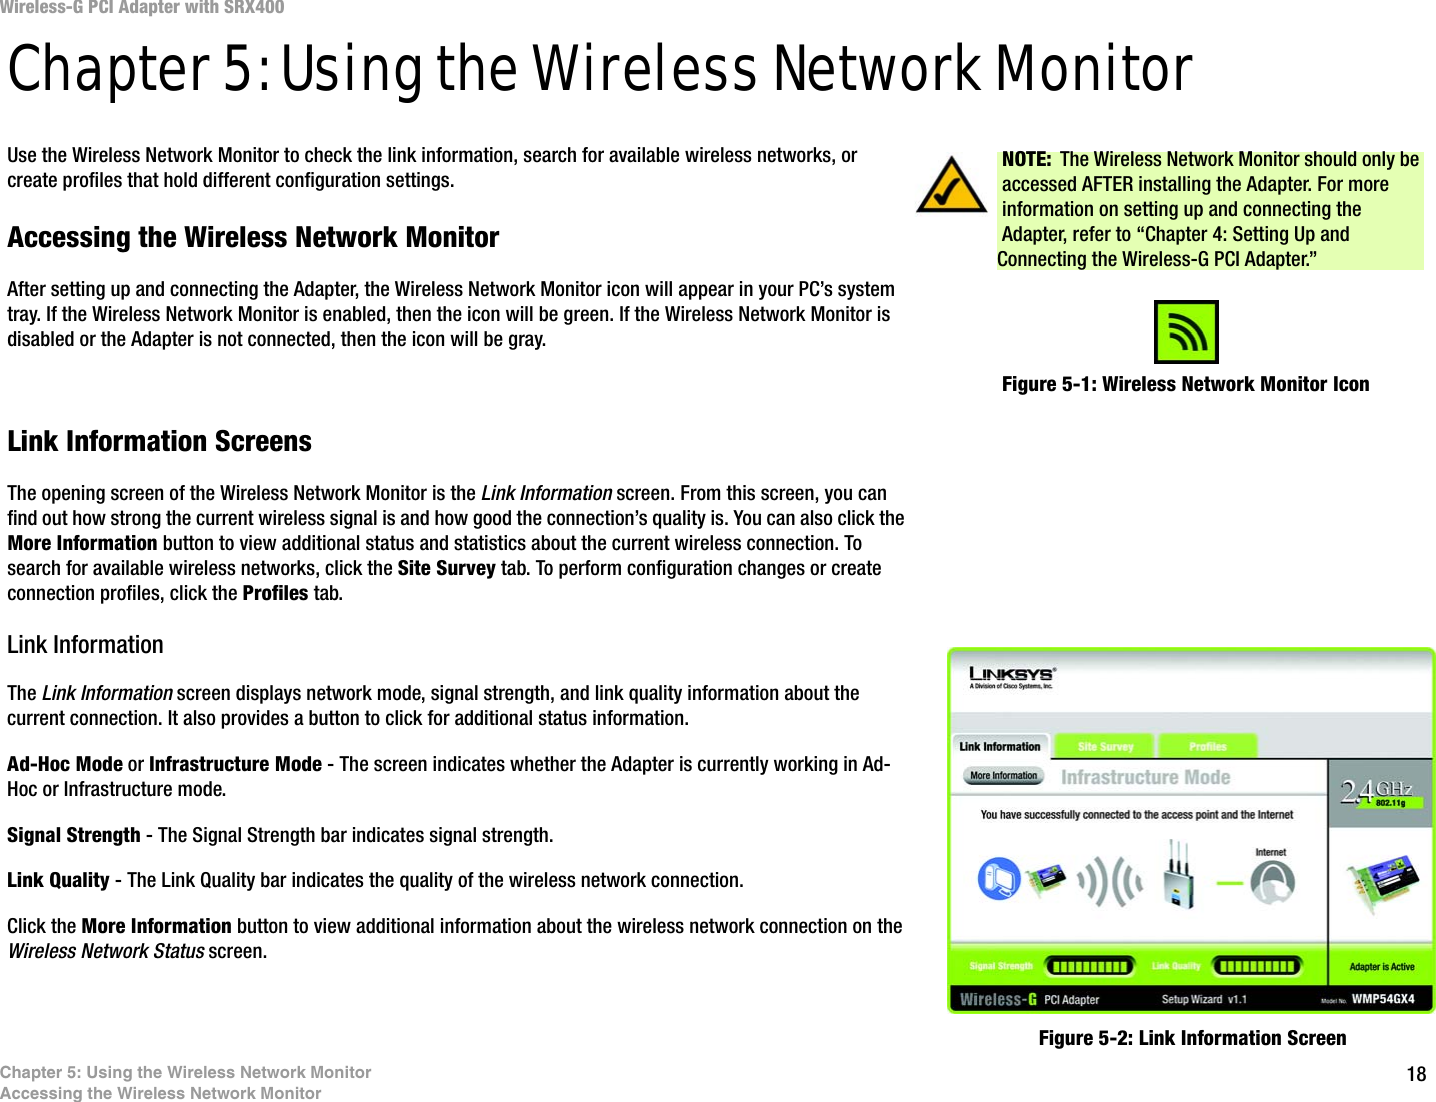 18Chapter 5: Using the Wireless Network MonitorAccessing the Wireless Network MonitorWireless-G PCI Adapter with SRX400Chapter 5: Using the Wireless Network MonitorUse the Wireless Network Monitor to check the link information, search for available wireless networks, or create profiles that hold different configuration settings.Accessing the Wireless Network MonitorAfter setting up and connecting the Adapter, the Wireless Network Monitor icon will appear in your PC’s system tray. If the Wireless Network Monitor is enabled, then the icon will be green. If the Wireless Network Monitor is disabled or the Adapter is not connected, then the icon will be gray.Link Information ScreensThe opening screen of the Wireless Network Monitor is the Link Information screen. From this screen, you can find out how strong the current wireless signal is and how good the connection’s quality is. You can also click the More Information button to view additional status and statistics about the current wireless connection. To search for available wireless networks, click the Site Survey tab. To perform configuration changes or create connection profiles, click the Profiles tab.Link InformationThe Link Information screen displays network mode, signal strength, and link quality information about the current connection. It also provides a button to click for additional status information.Ad-Hoc Mode or Infrastructure Mode - The screen indicates whether the Adapter is currently working in Ad-Hoc or Infrastructure mode.Signal Strength - The Signal Strength bar indicates signal strength. Link Quality - The Link Quality bar indicates the quality of the wireless network connection.Click the More Information button to view additional information about the wireless network connection on the Wireless Network Status screen.Figure 5-1: Wireless Network Monitor IconFigure 5-2: Link Information ScreenNOTE: The Wireless Network Monitor should only be accessed AFTER installing the Adapter. For more information on setting up and connecting the Adapter, refer to “Chapter 4: Setting Up and Connecting the Wireless-G PCI Adapter.”